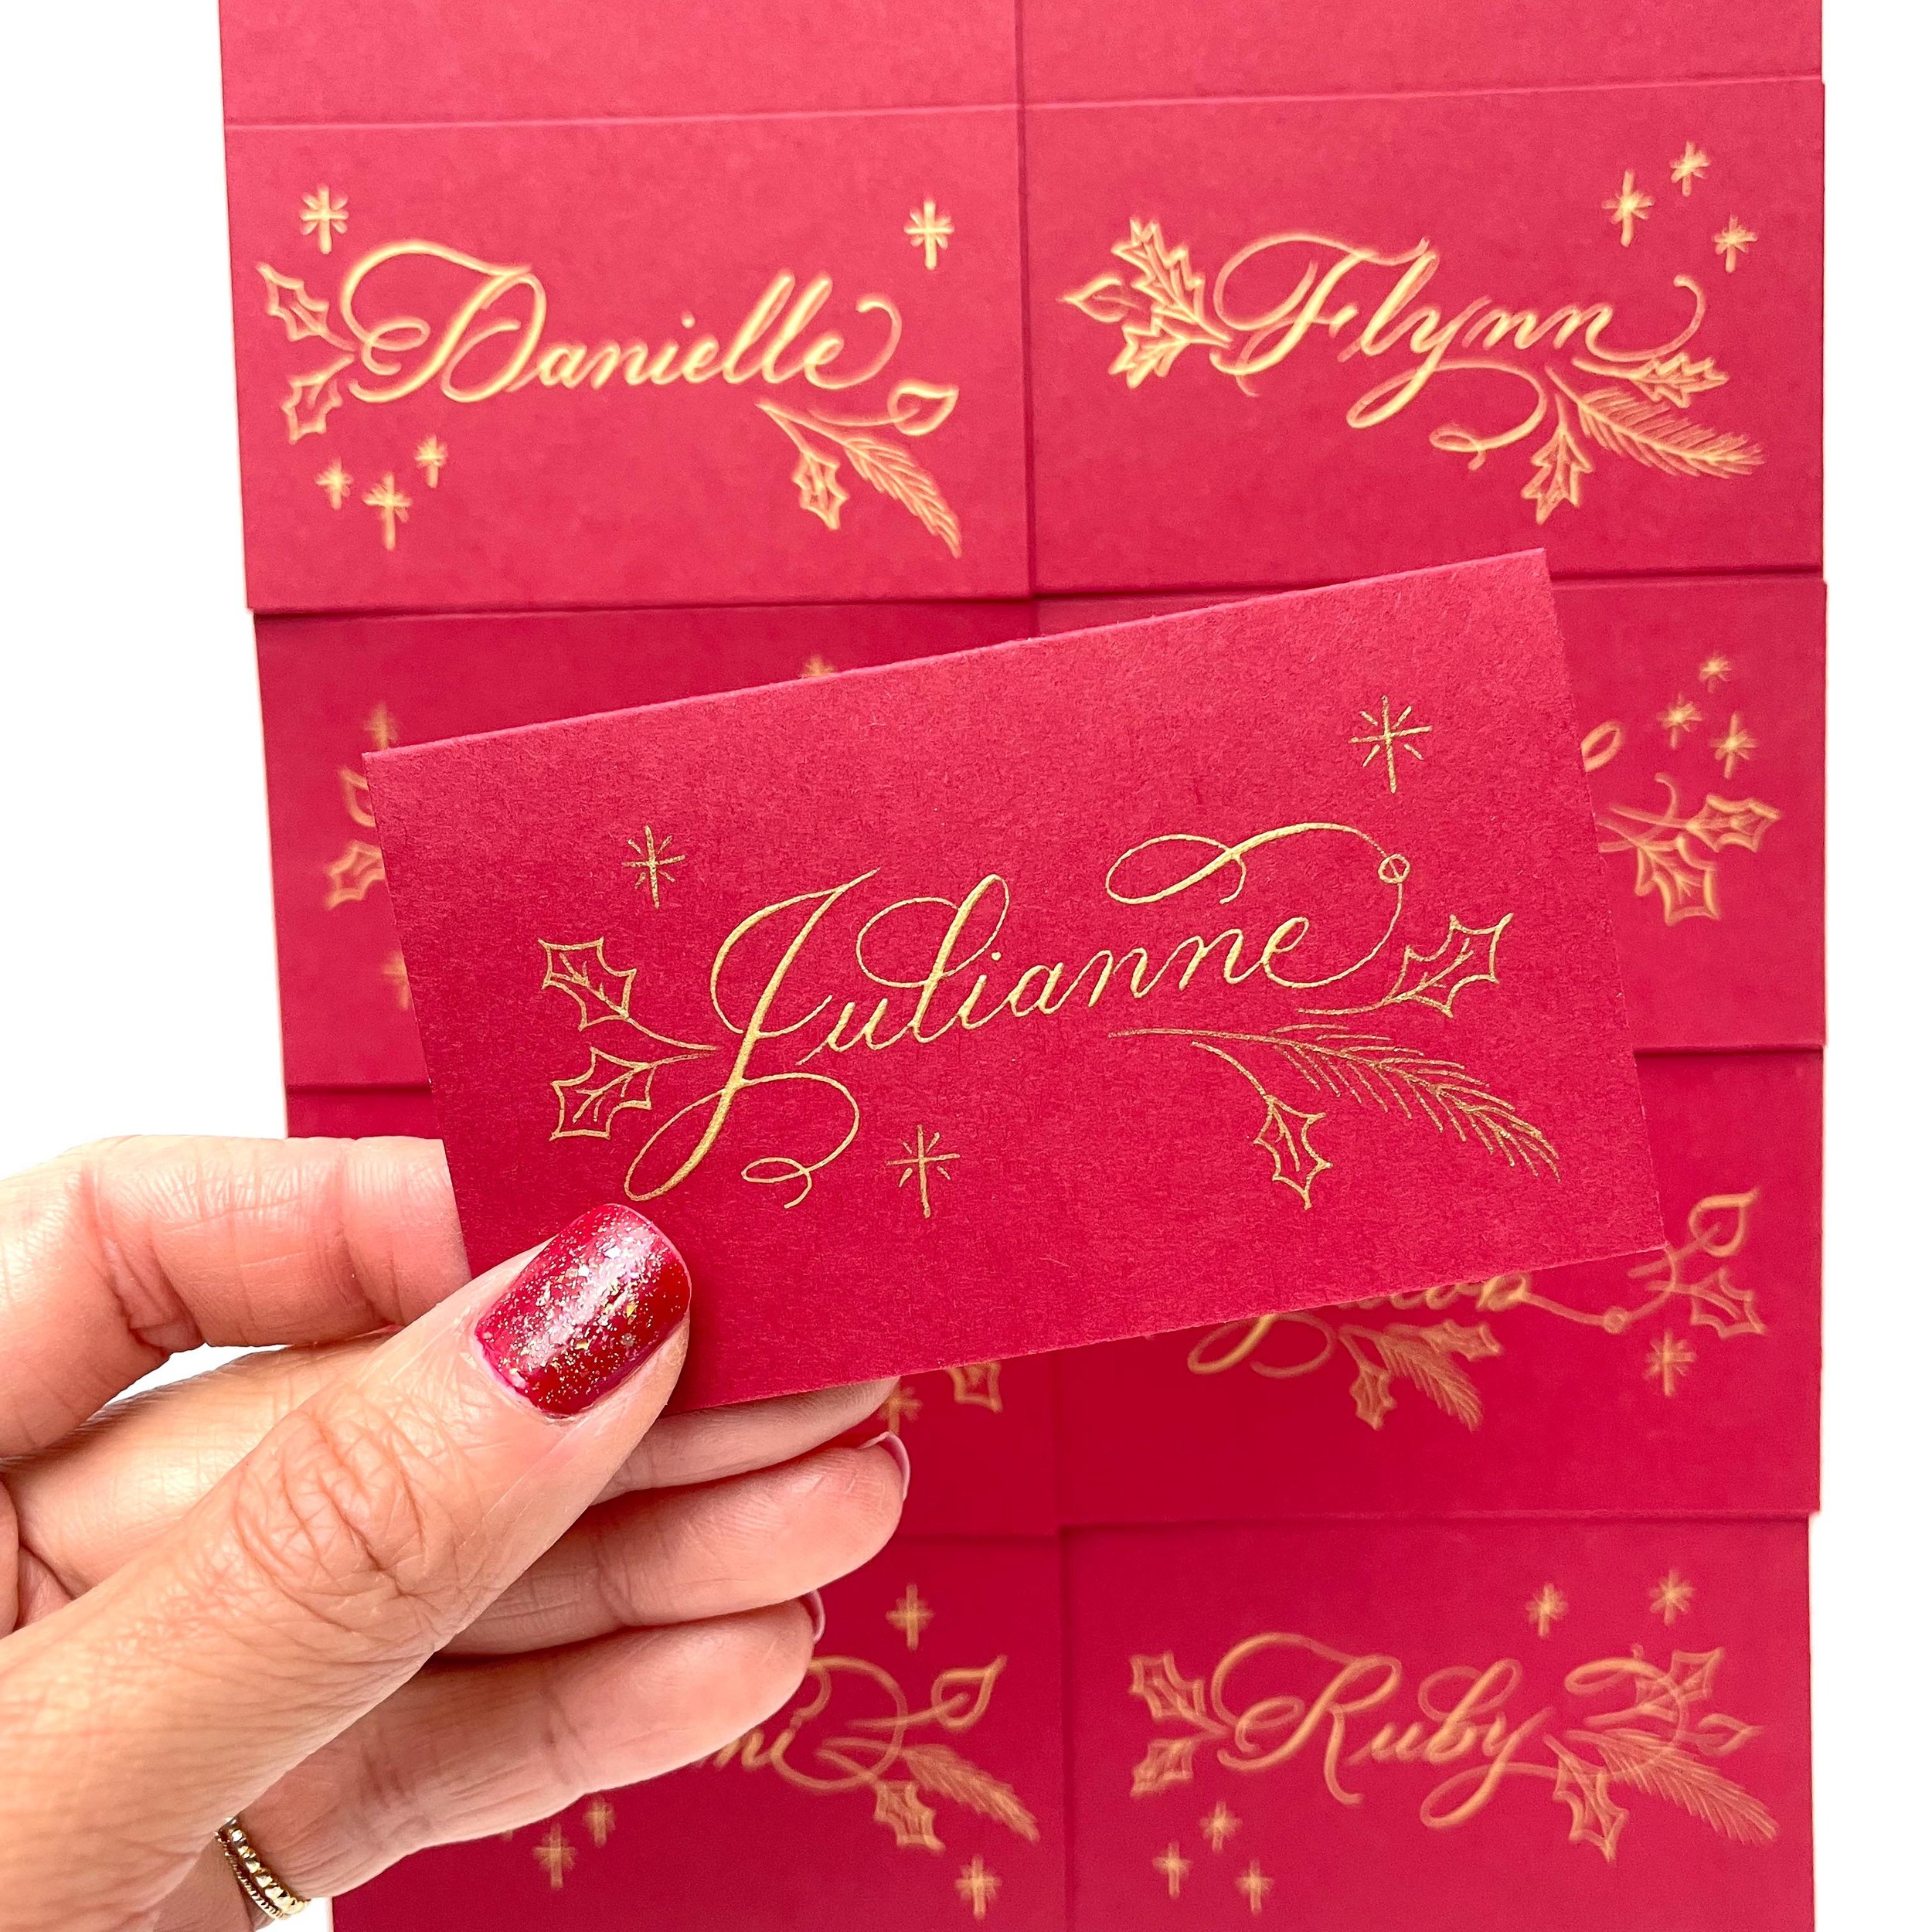 Los Angeles Calligrapher - Wedding Calligraphy Place cards